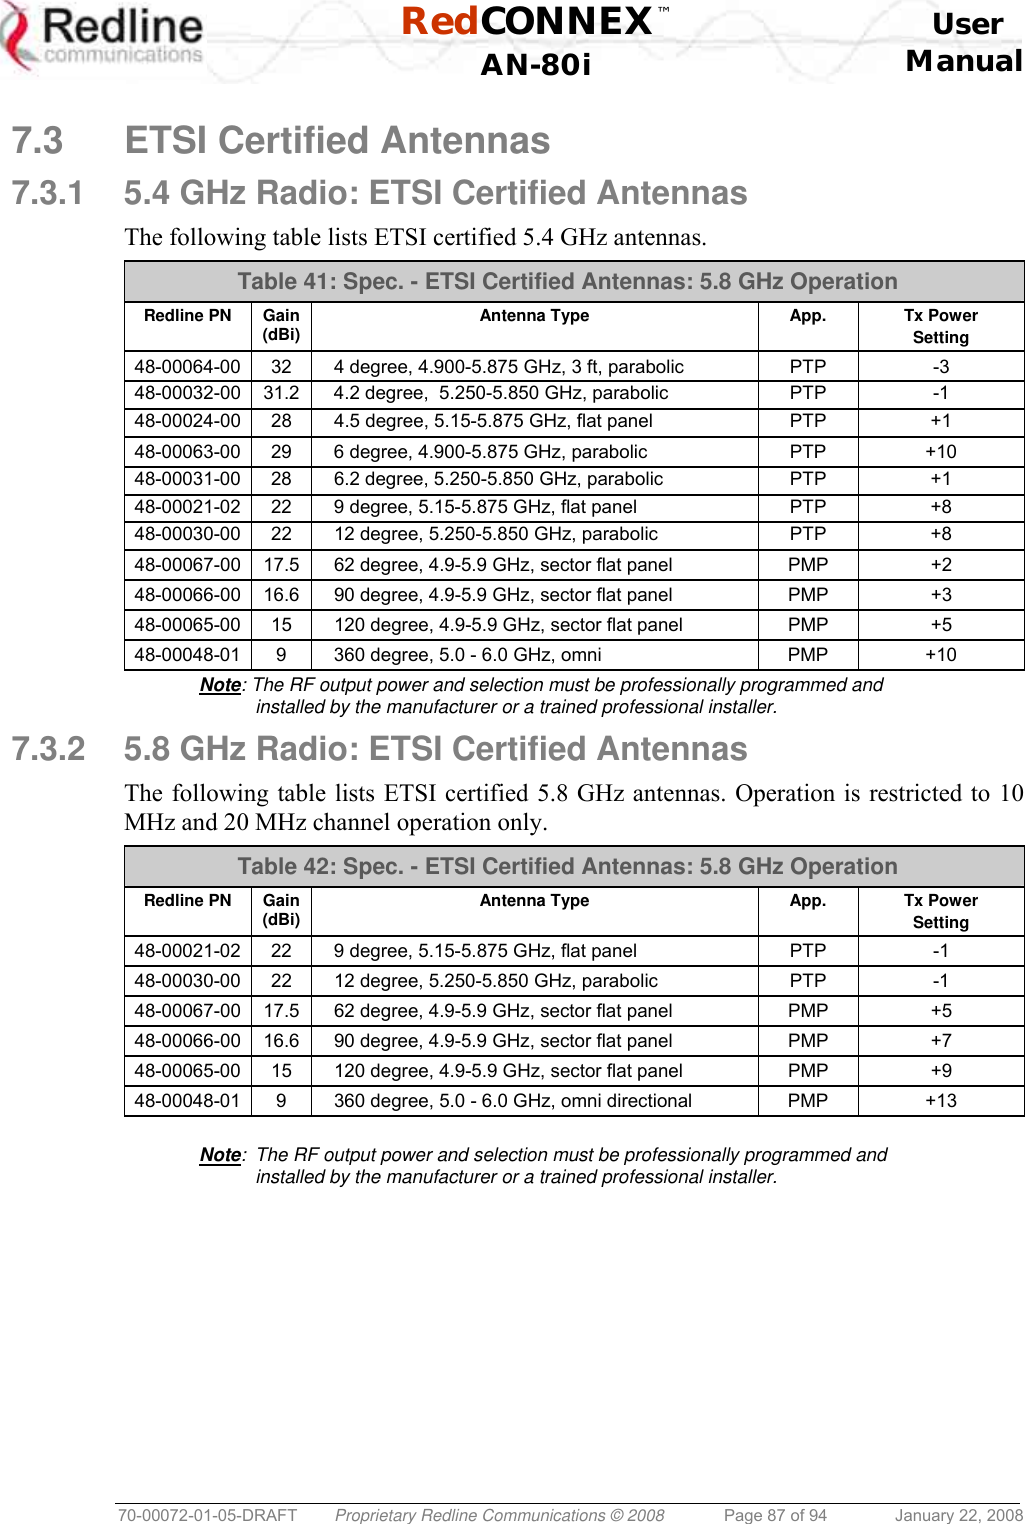  RedCONNEX™    User  AN-80i Manual  70-00072-01-05-DRAFT  Proprietary Redline Communications © 2008  Page 87 of 94  January 22, 2008  7.3  ETSI Certified Antennas 7.3.1  5.4 GHz Radio: ETSI Certified Antennas  The following table lists ETSI certified 5.4 GHz antennas. Table 41: Spec. - ETSI Certified Antennas: 5.8 GHz Operation Redline PN  Gain (dBi)  Antenna Type  App.  Tx Power Setting 48-00064-00  32  4 degree, 4.900-5.875 GHz, 3 ft, parabolic  PTP  -3 48-00032-00  31.2  4.2 degree,  5.250-5.850 GHz, parabolic  PTP  -1 48-00024-00  28  4.5 degree, 5.15-5.875 GHz, flat panel  PTP  +1 48-00063-00  29  6 degree, 4.900-5.875 GHz, parabolic  PTP  +10 48-00031-00  28  6.2 degree, 5.250-5.850 GHz, parabolic  PTP  +1 48-00021-02  22  9 degree, 5.15-5.875 GHz, flat panel  PTP  +8 48-00030-00  22  12 degree, 5.250-5.850 GHz, parabolic  PTP  +8 48-00067-00  17.5  62 degree, 4.9-5.9 GHz, sector flat panel  PMP  +2 48-00066-00  16.6  90 degree, 4.9-5.9 GHz, sector flat panel  PMP  +3 48-00065-00  15  120 degree, 4.9-5.9 GHz, sector flat panel  PMP  +5 48-00048-01  9  360 degree, 5.0 - 6.0 GHz, omni  PMP  +10 Note: The RF output power and selection must be professionally programmed and installed by the manufacturer or a trained professional installer. 7.3.2  5.8 GHz Radio: ETSI Certified Antennas  The following table lists ETSI certified 5.8 GHz antennas. Operation is restricted to 10 MHz and 20 MHz channel operation only. Table 42: Spec. - ETSI Certified Antennas: 5.8 GHz Operation Redline PN  Gain (dBi)  Antenna Type  App.  Tx Power Setting 48-00021-02  22  9 degree, 5.15-5.875 GHz, flat panel  PTP  -1 48-00030-00  22  12 degree, 5.250-5.850 GHz, parabolic  PTP  -1 48-00067-00  17.5  62 degree, 4.9-5.9 GHz, sector flat panel  PMP  +5 48-00066-00  16.6  90 degree, 4.9-5.9 GHz, sector flat panel  PMP  +7 48-00065-00  15  120 degree, 4.9-5.9 GHz, sector flat panel  PMP  +9 48-00048-01  9  360 degree, 5.0 - 6.0 GHz, omni directional  PMP  +13  Note:  The RF output power and selection must be professionally programmed and installed by the manufacturer or a trained professional installer.  